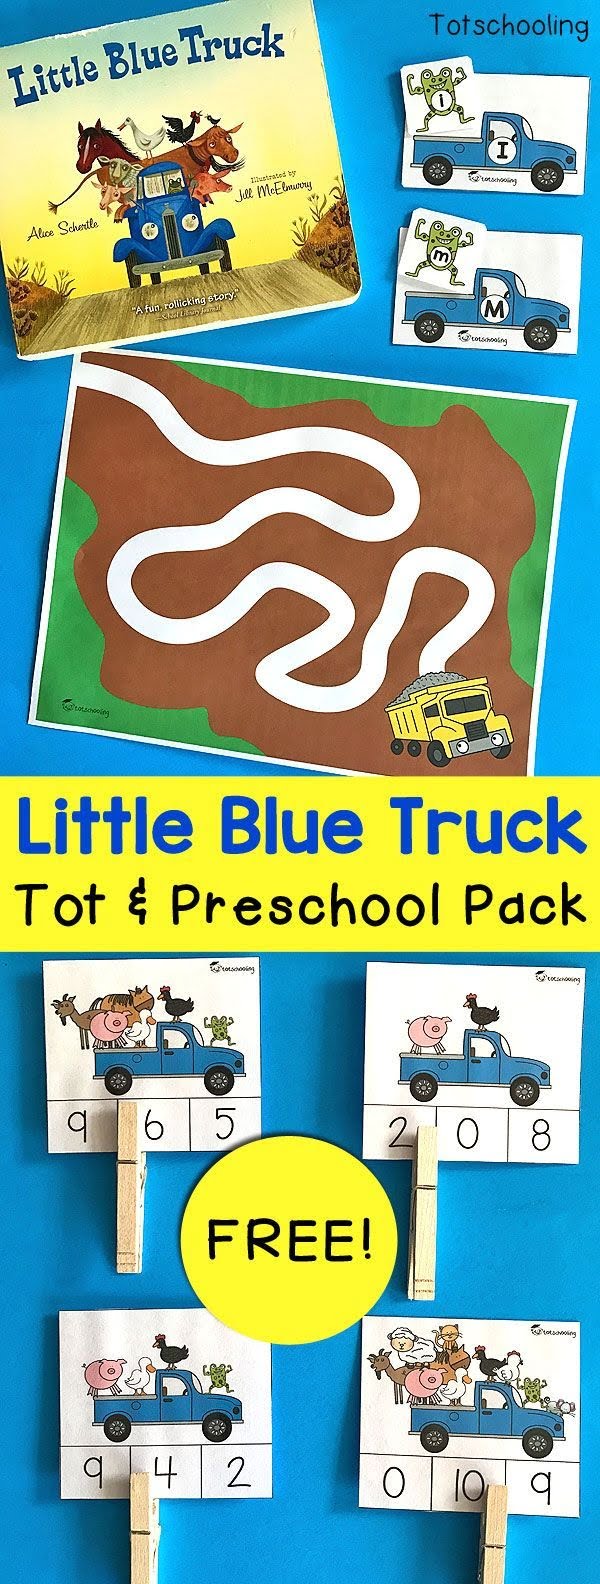 FREE Little Blue Truck Printable Learning Pack For Toddlers And Preschoolers To Go Along With The Transportation Preschool Little Blue Trucks Preschool Colors